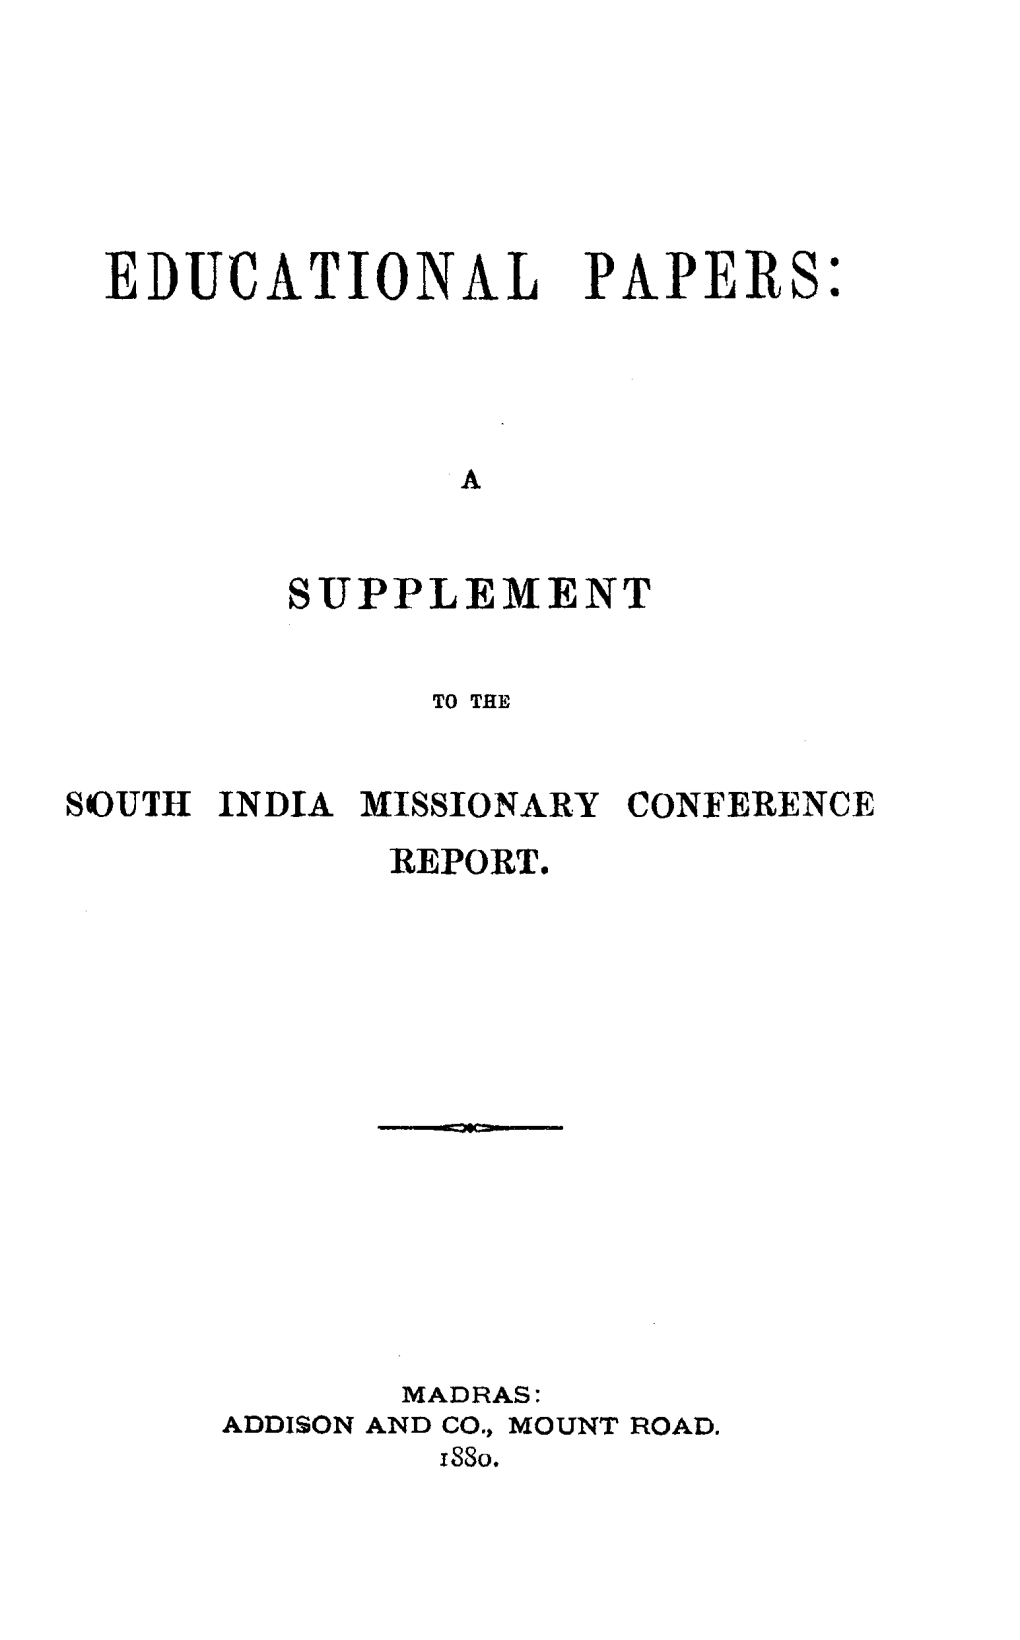 Educational Papers-A SUPPLEMENT to the SOUTH INDIA